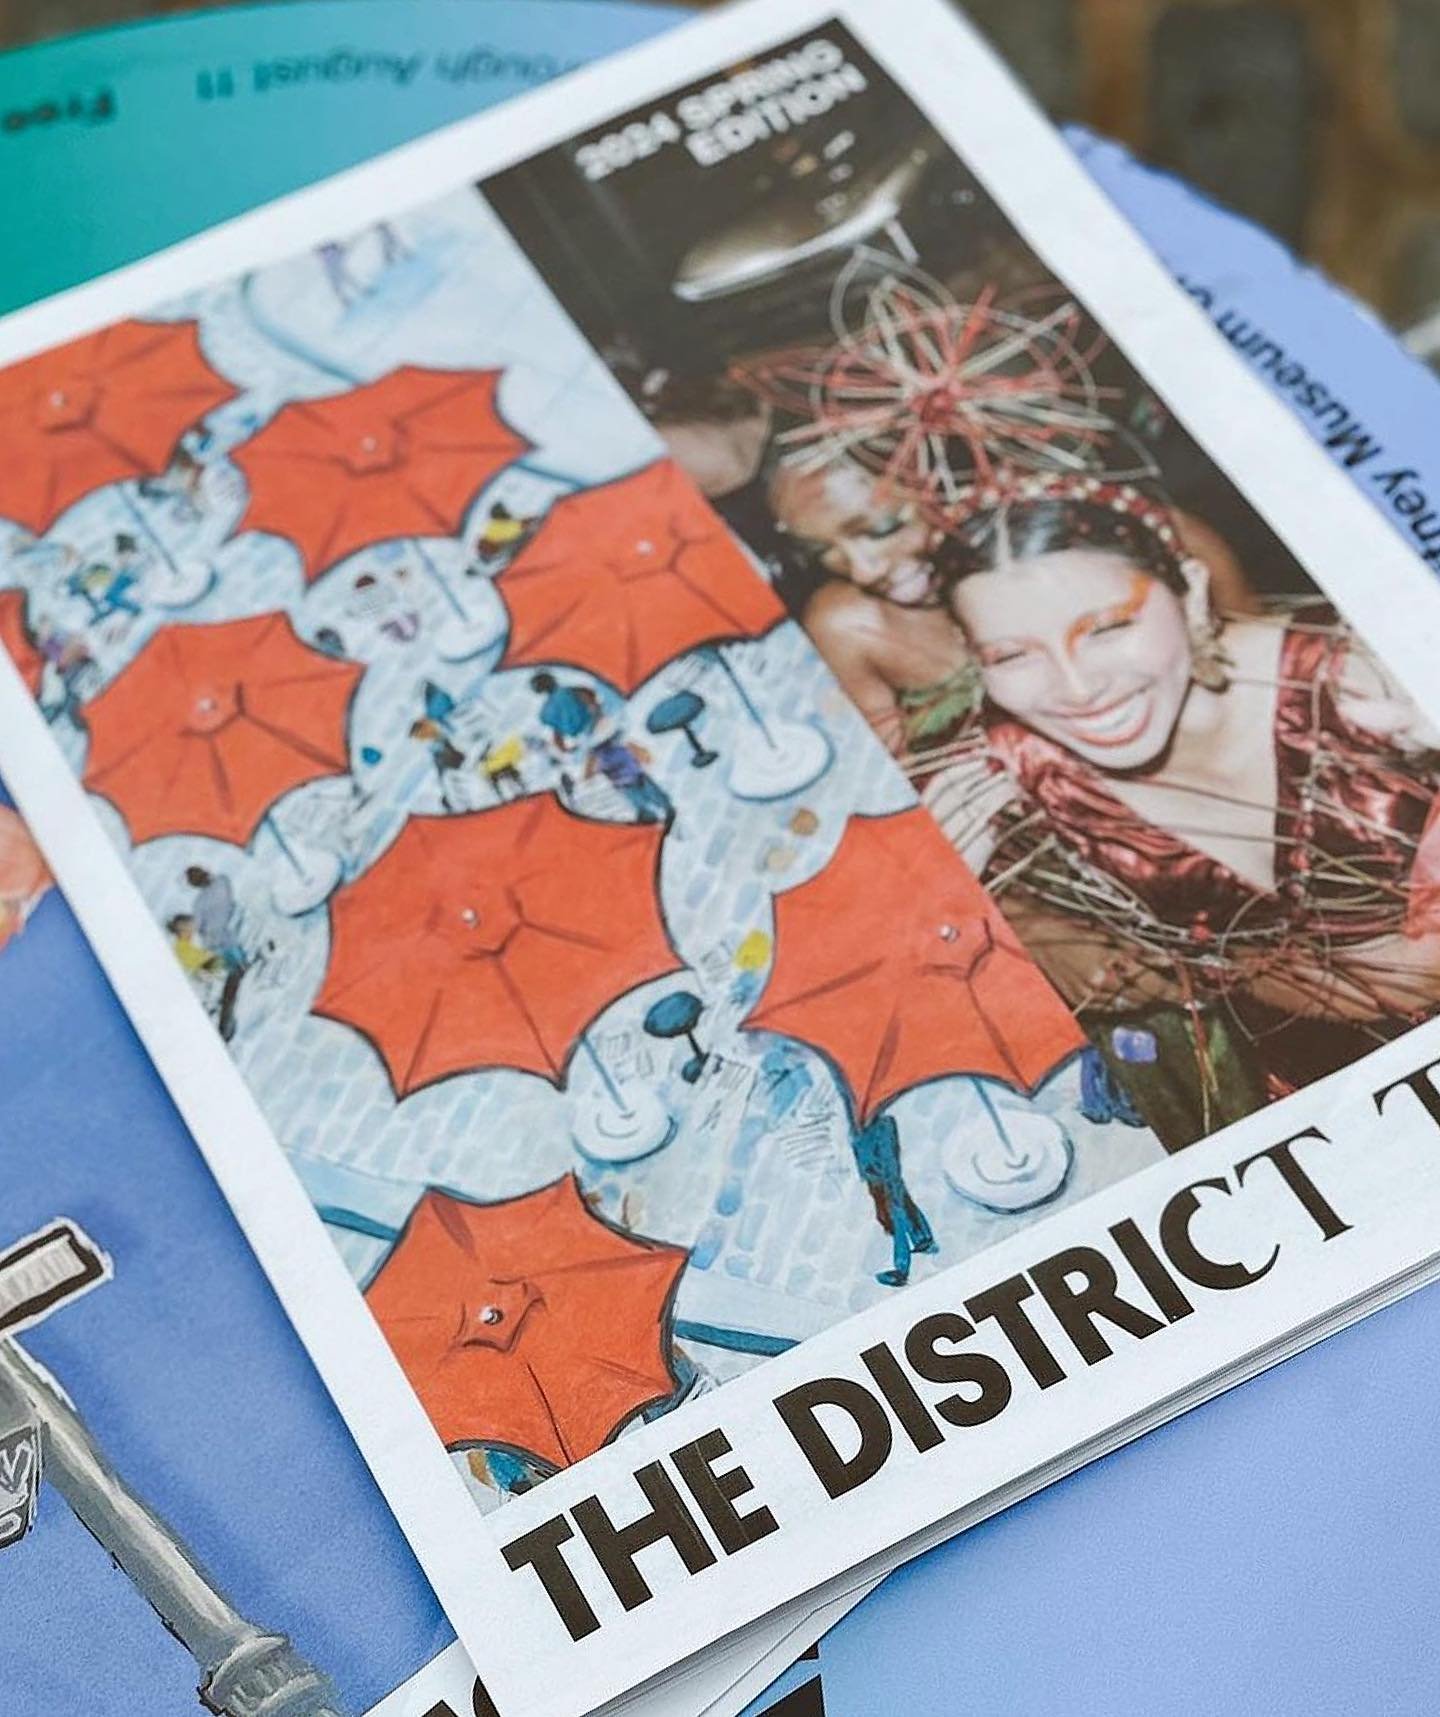 Pleased to have art on the cover of The District Tea, new from @meatpackingny with photography by @brakethrough_media and 2nd cover by Eatai Vardi